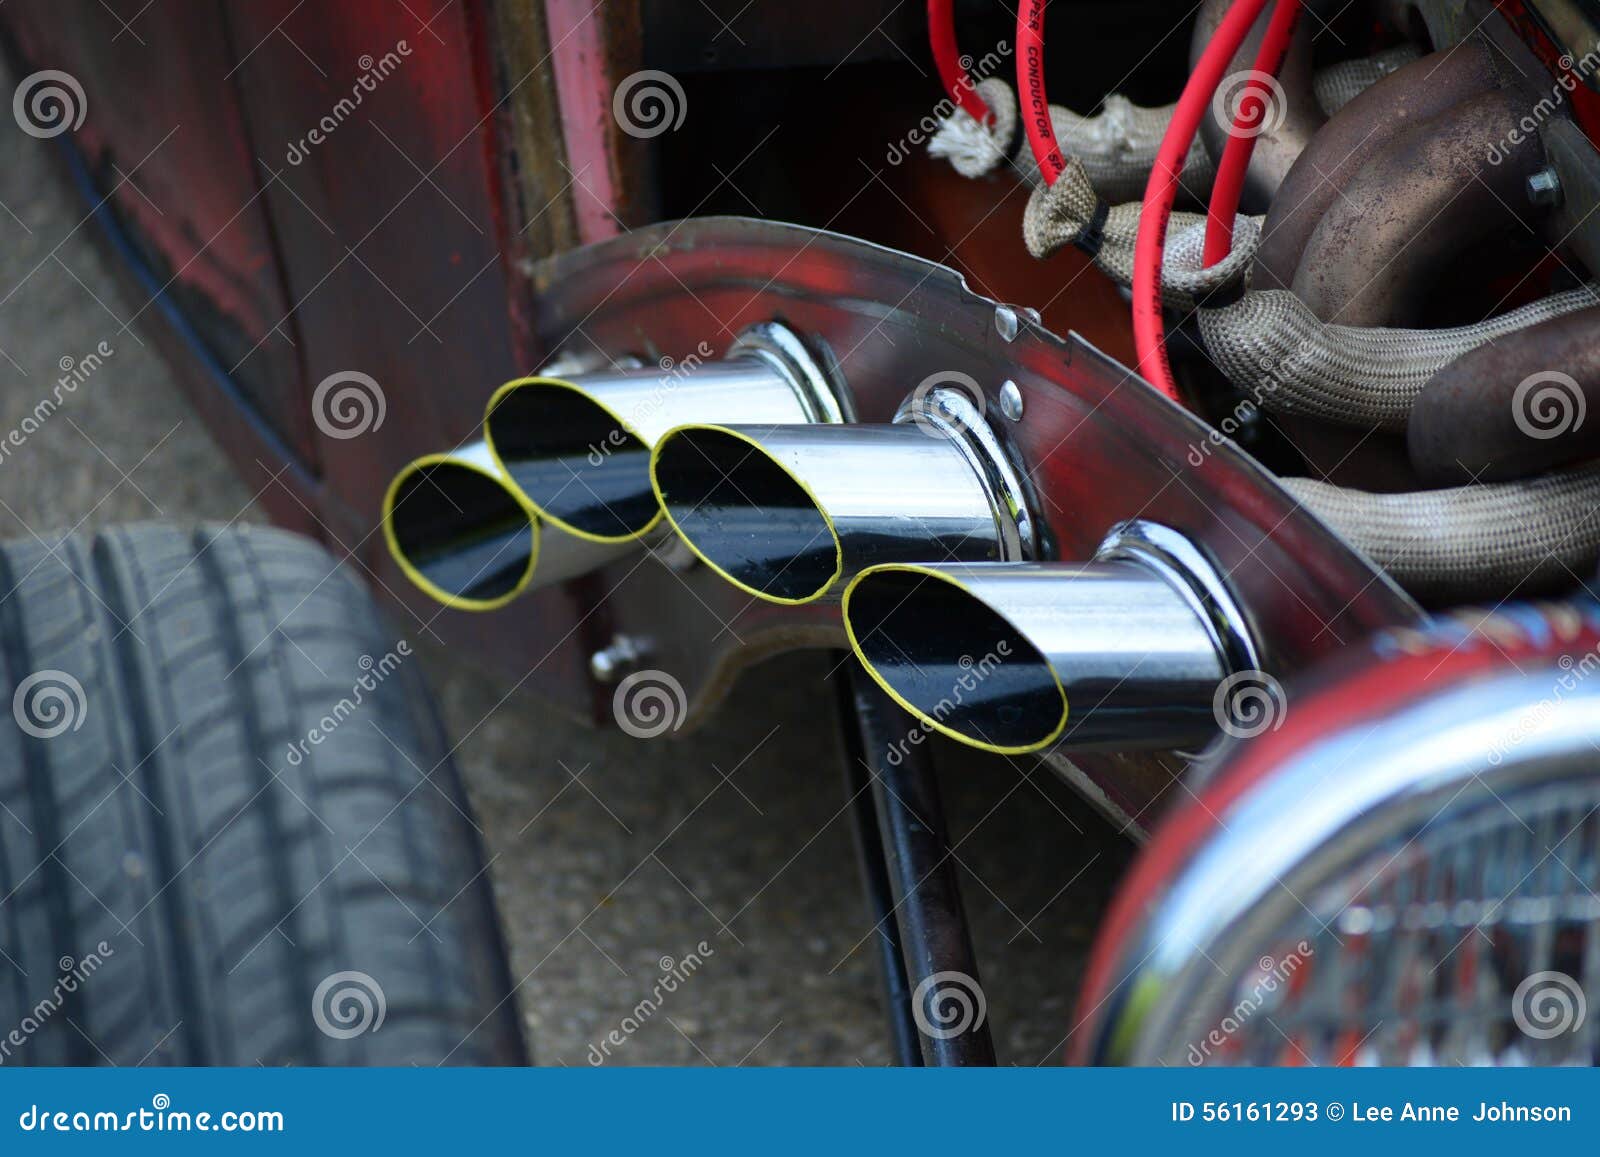 Classic Car Hot Rod Exhaust Pipes